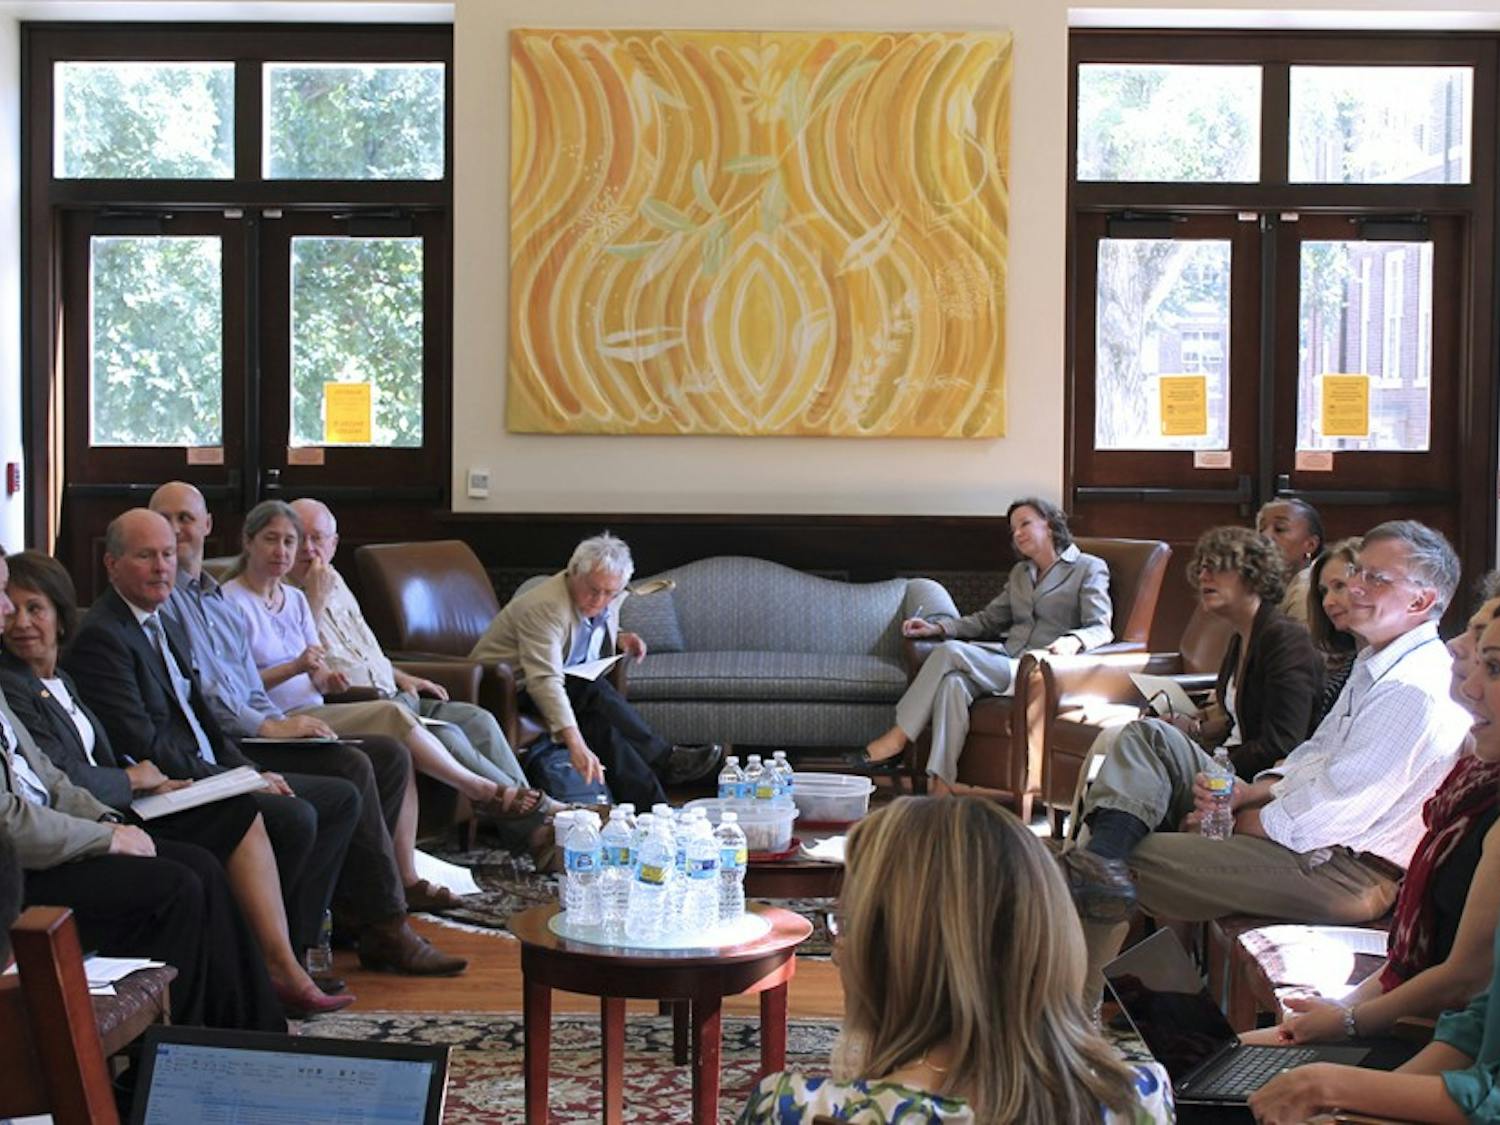 The faculty executive committee met to discuss university affairs at the Campus Y in the Queen Anne's Lounge on Sept.14, 2015.